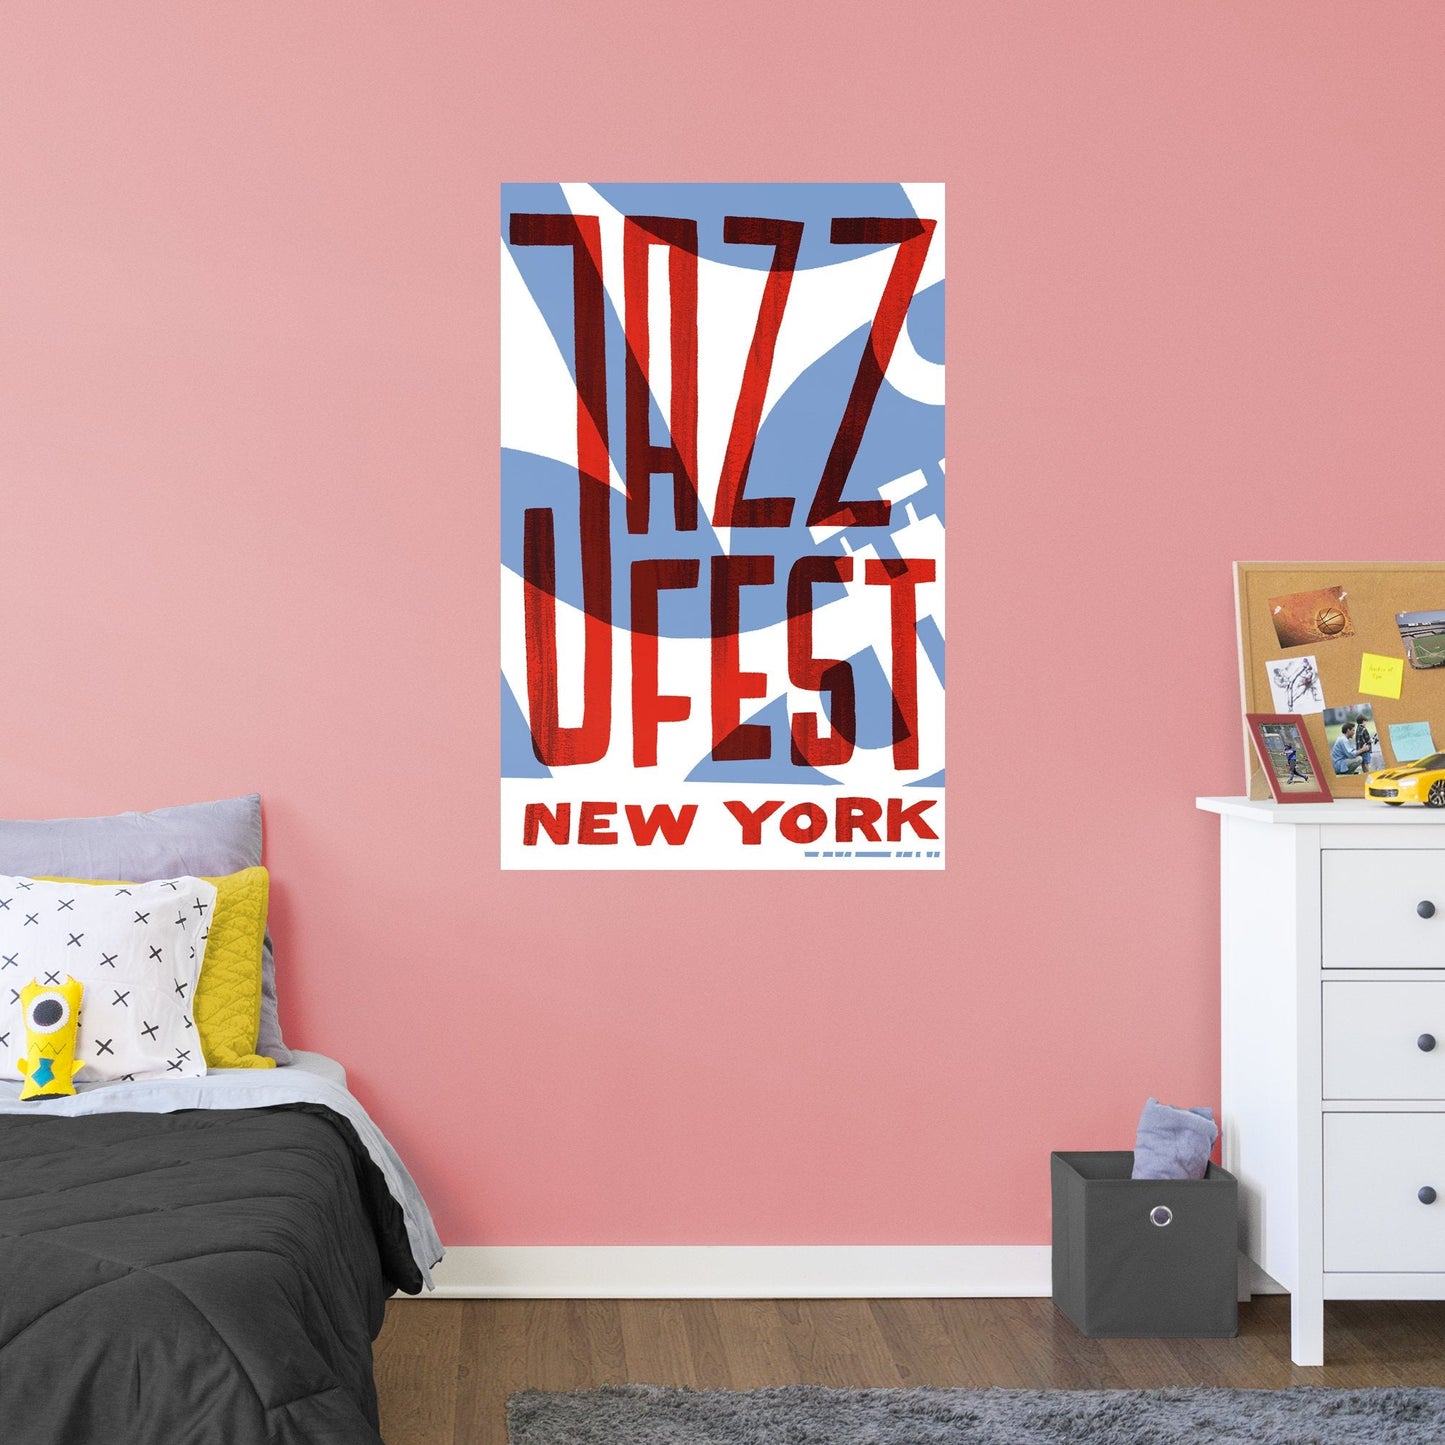 Soul Movie:  Jazz Fest New York Mural        - Officially Licensed Disney Removable Wall   Adhesive Decal